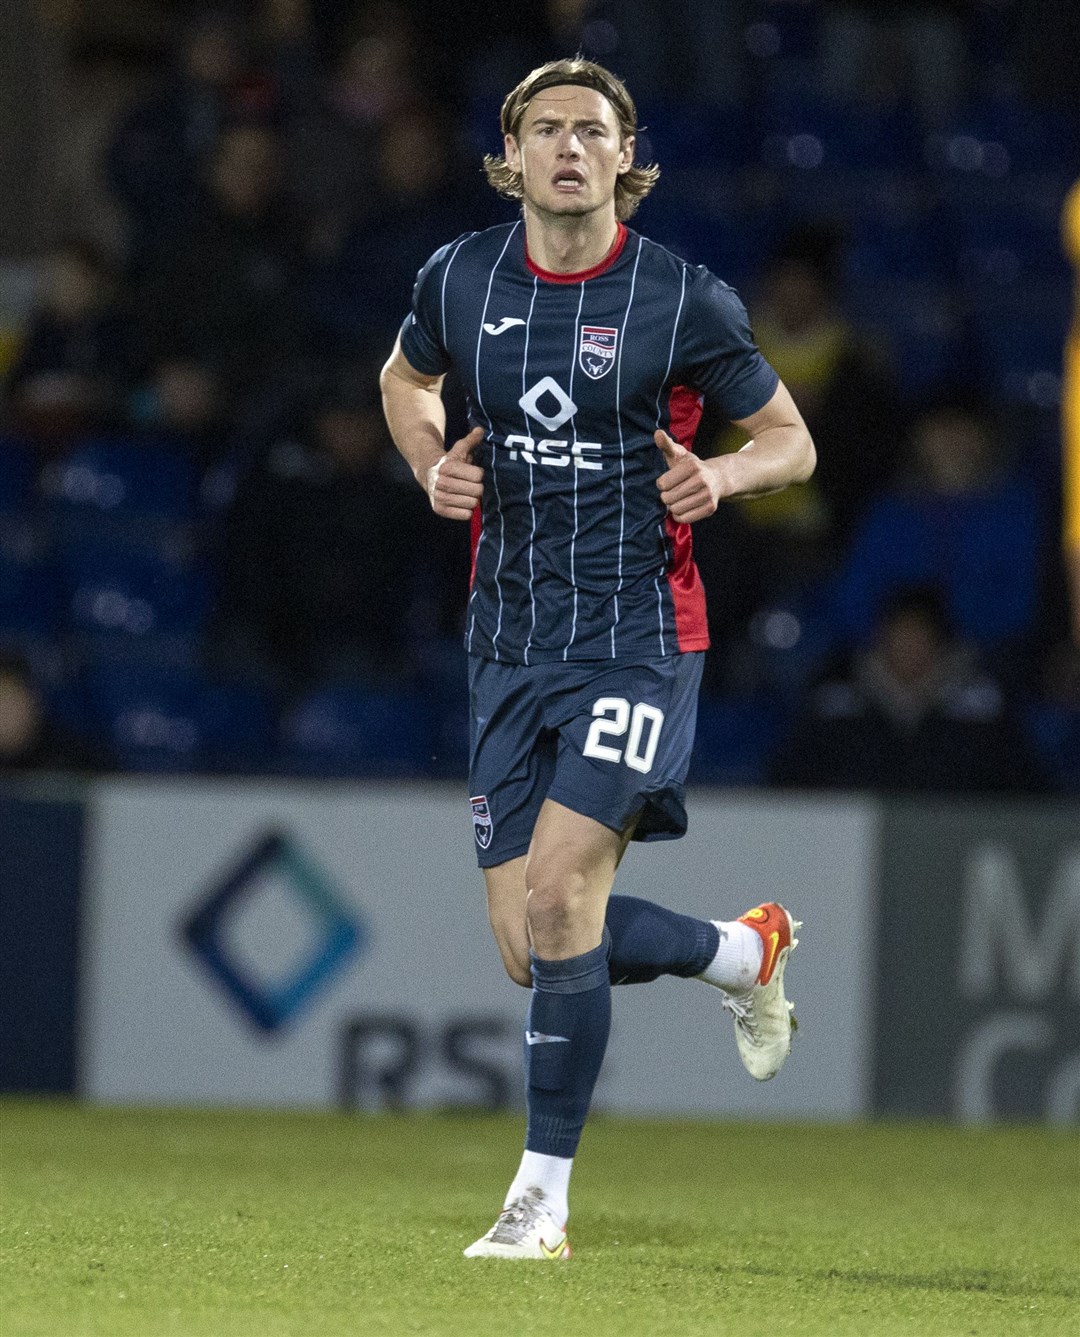 Declan Drysdale was one of two new arrivals in Dingwall in the January transfer window. Picture: Ken Macpherson